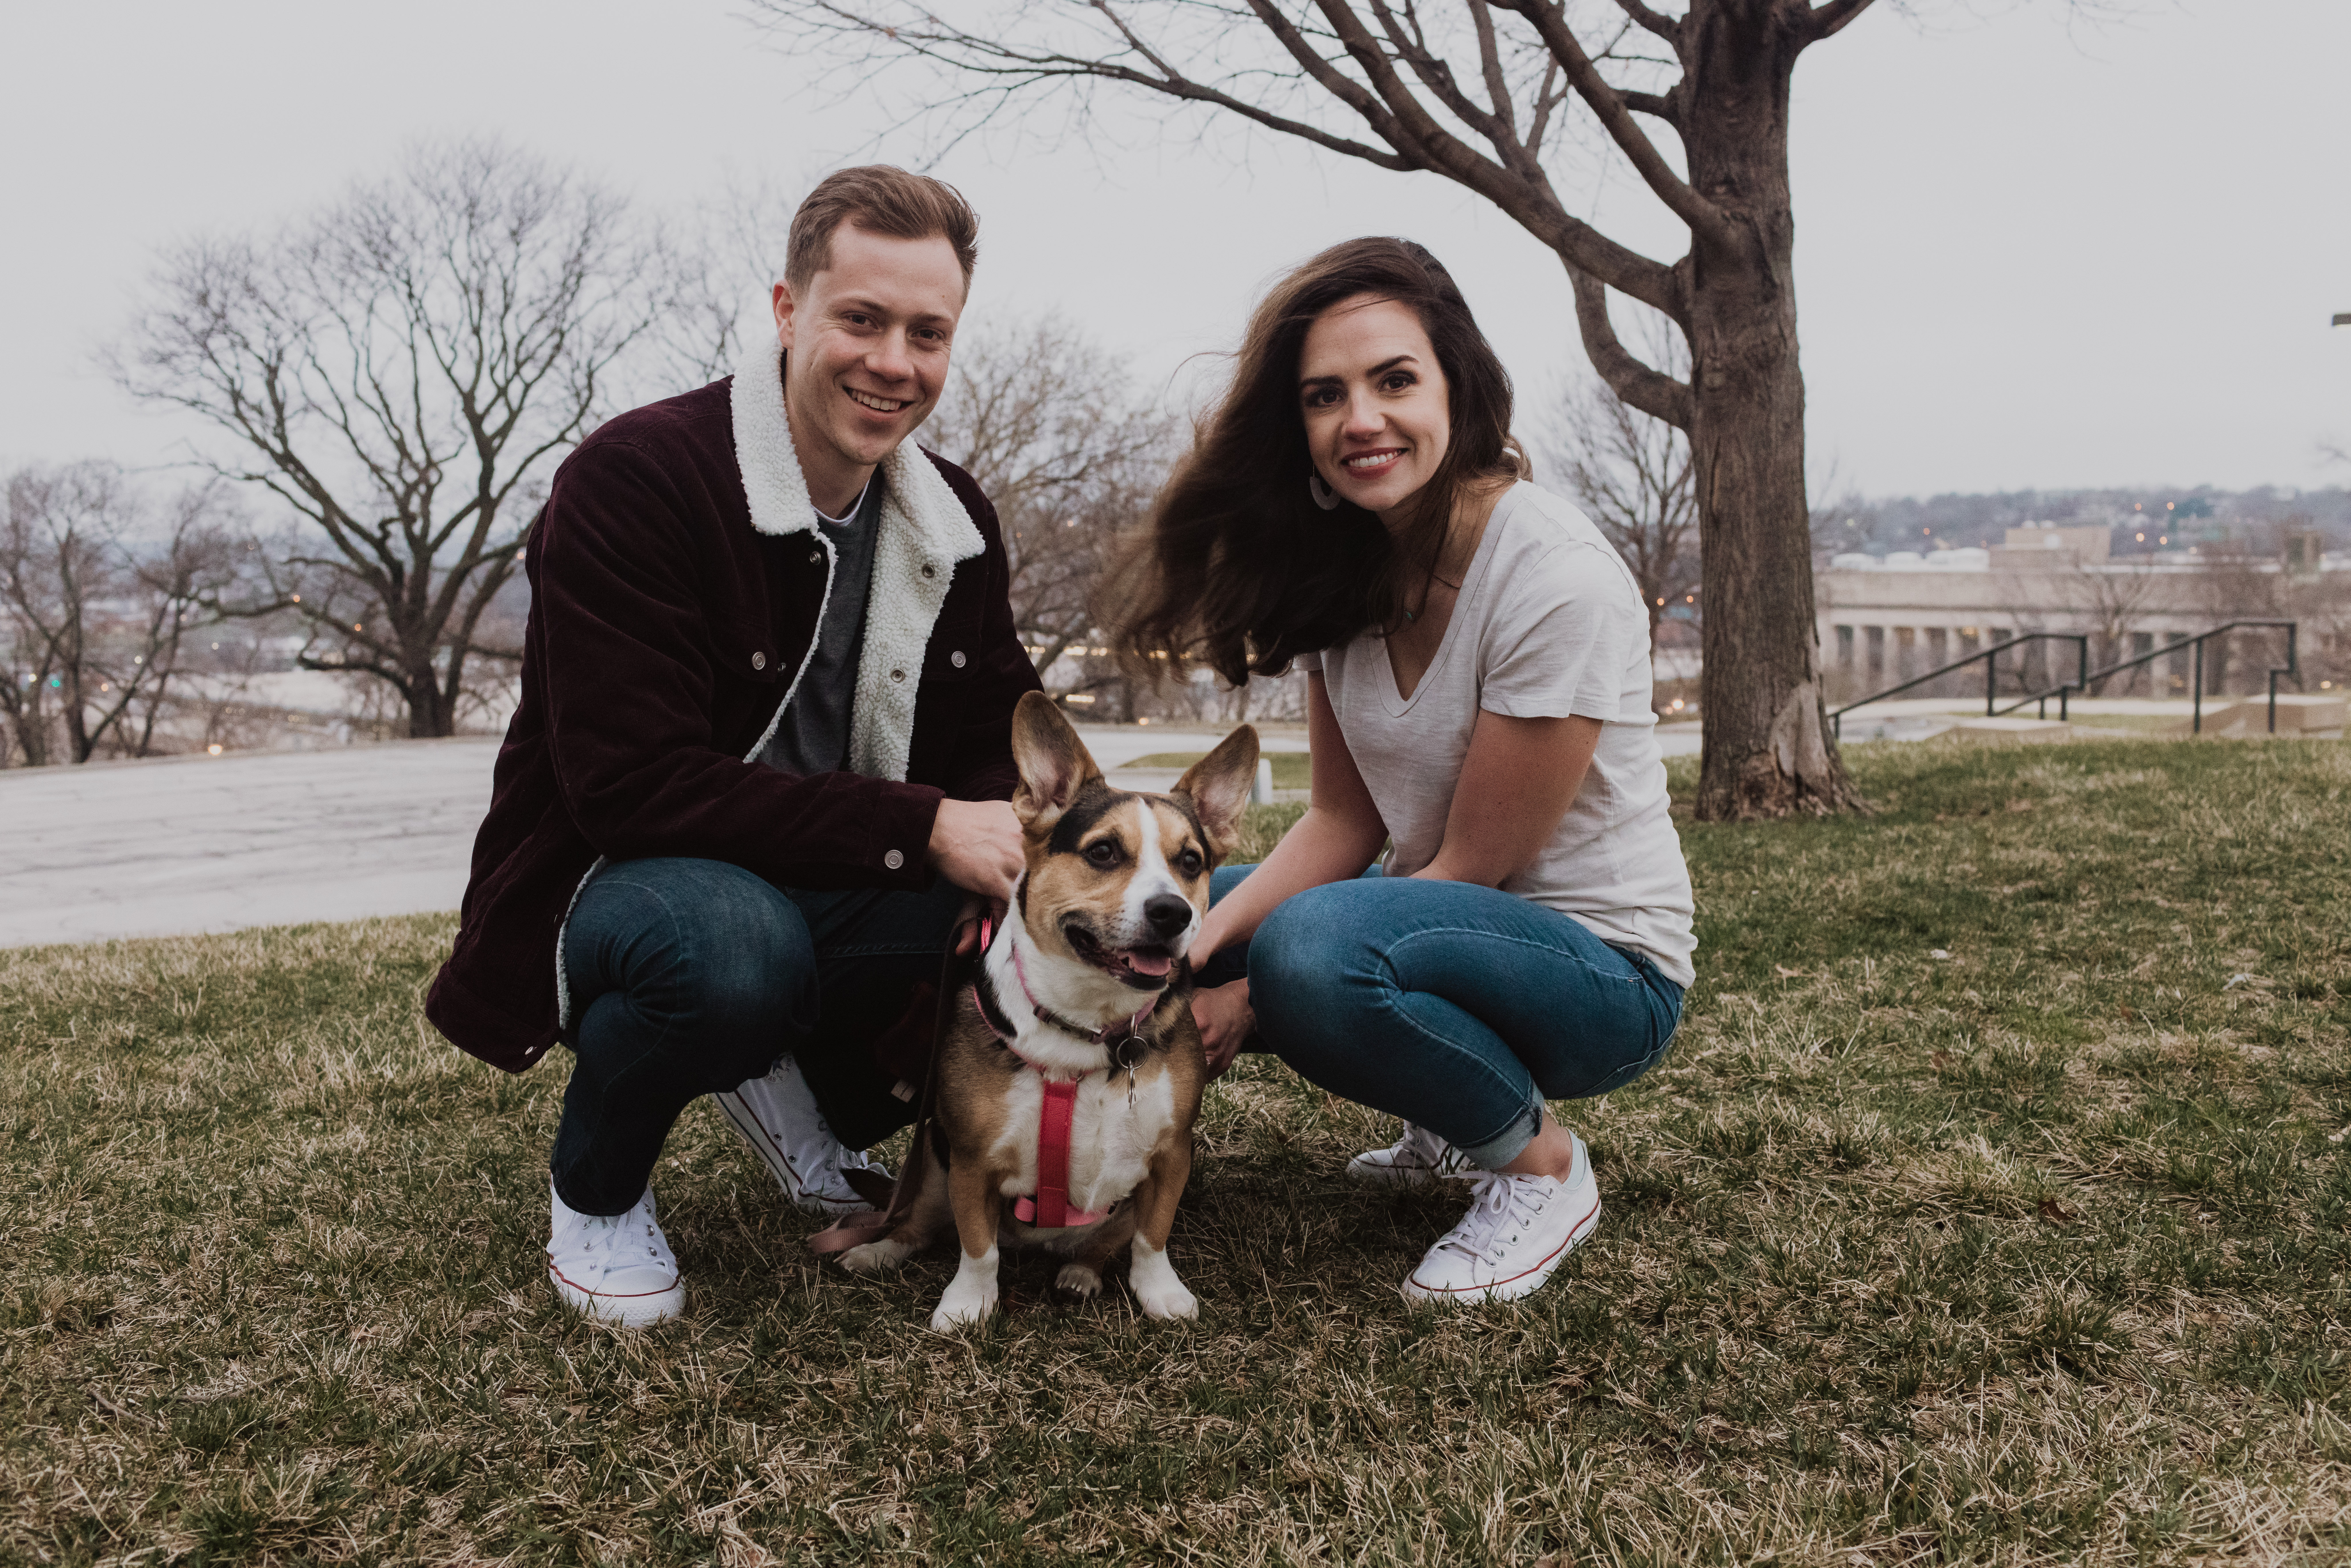 Downtown Kansas City Engagement Session with a dog